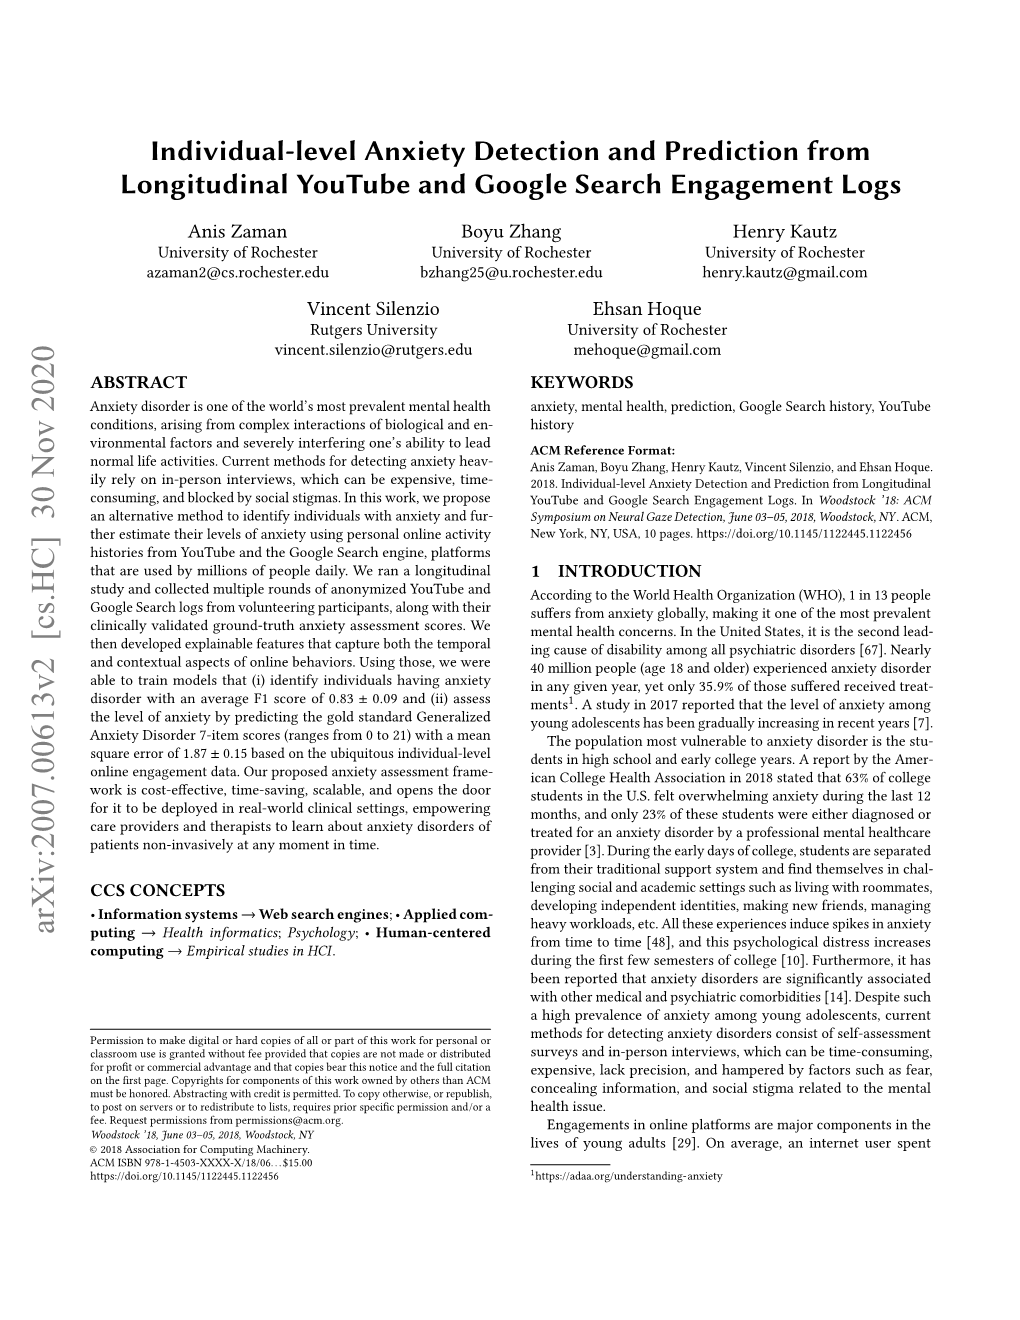 Individual-Level Anxiety Detection and Prediction from Longitudinal Youtube and Google Search Engagement Logs